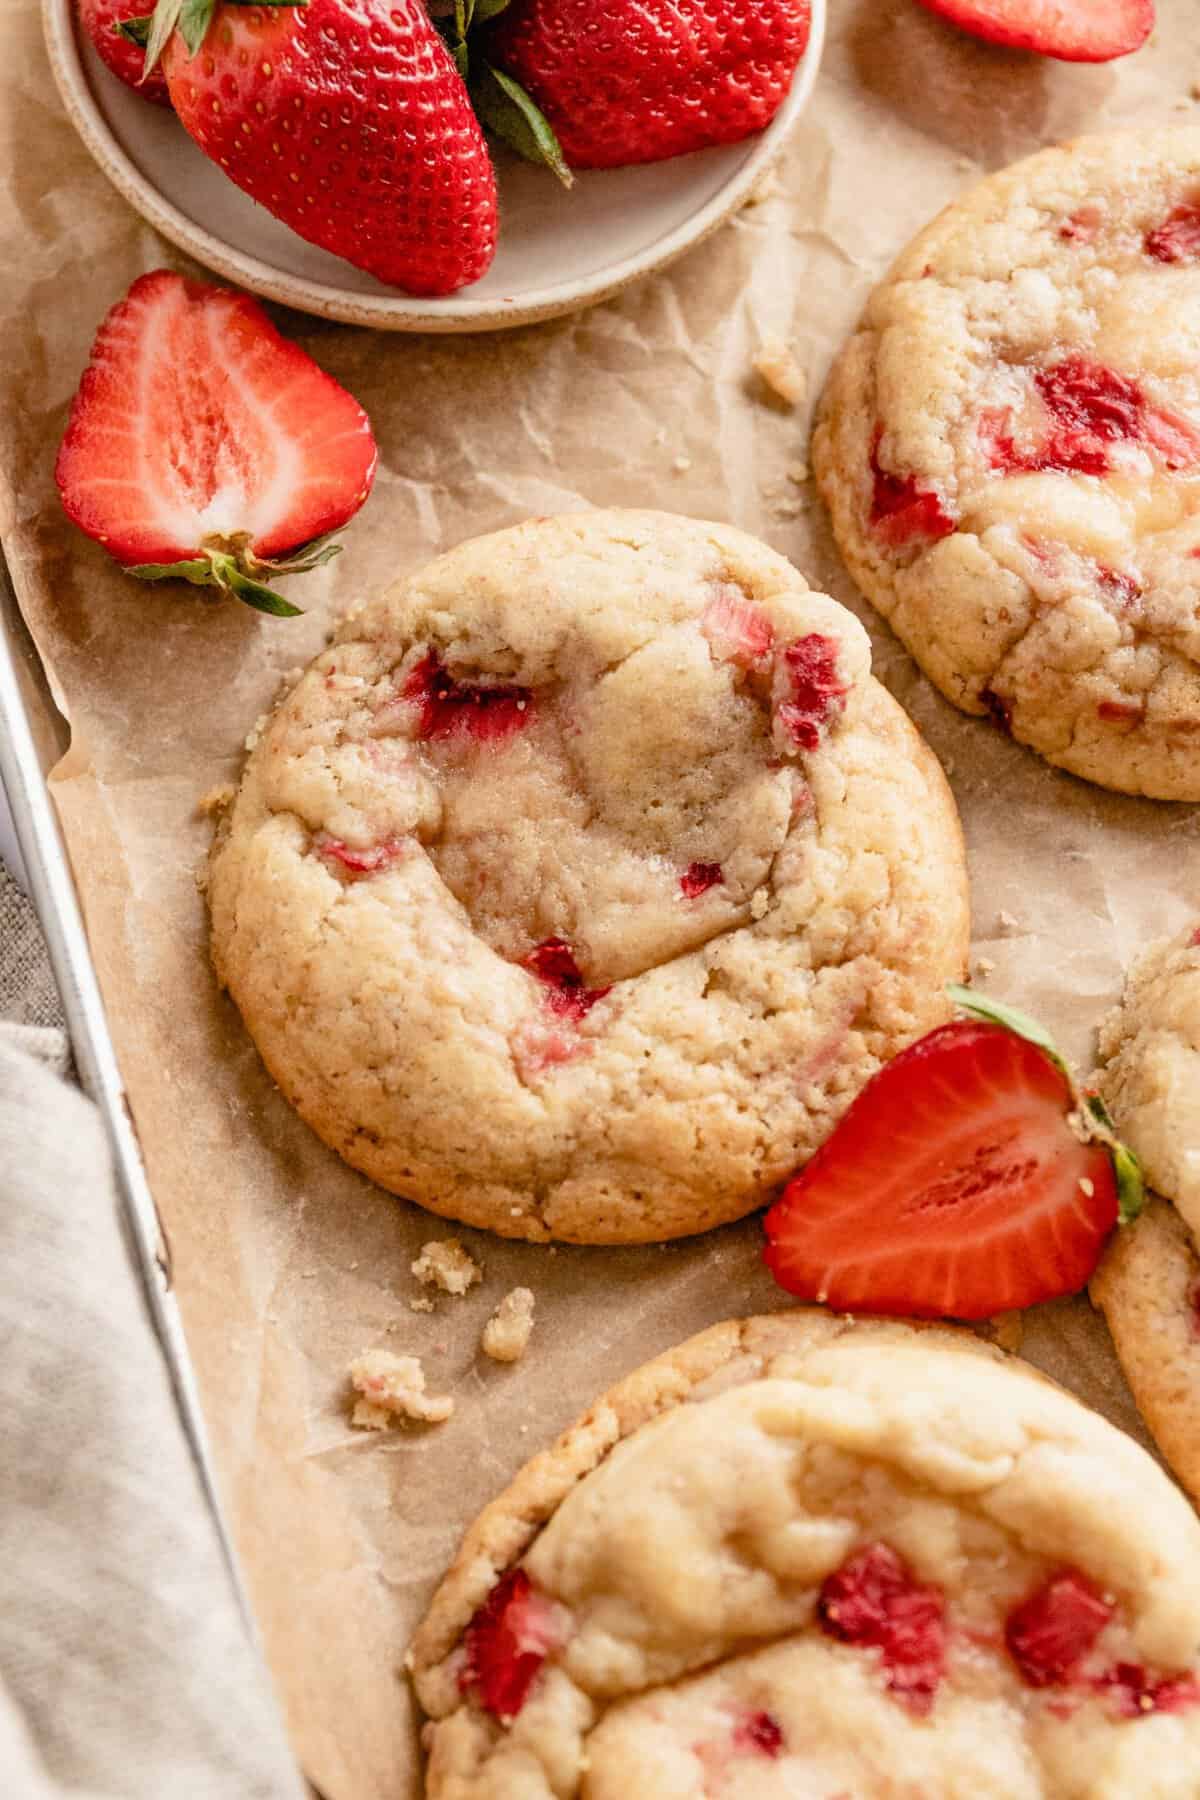 Cookies on brown paper next to a bowl of fresh strawberries on a tray. 